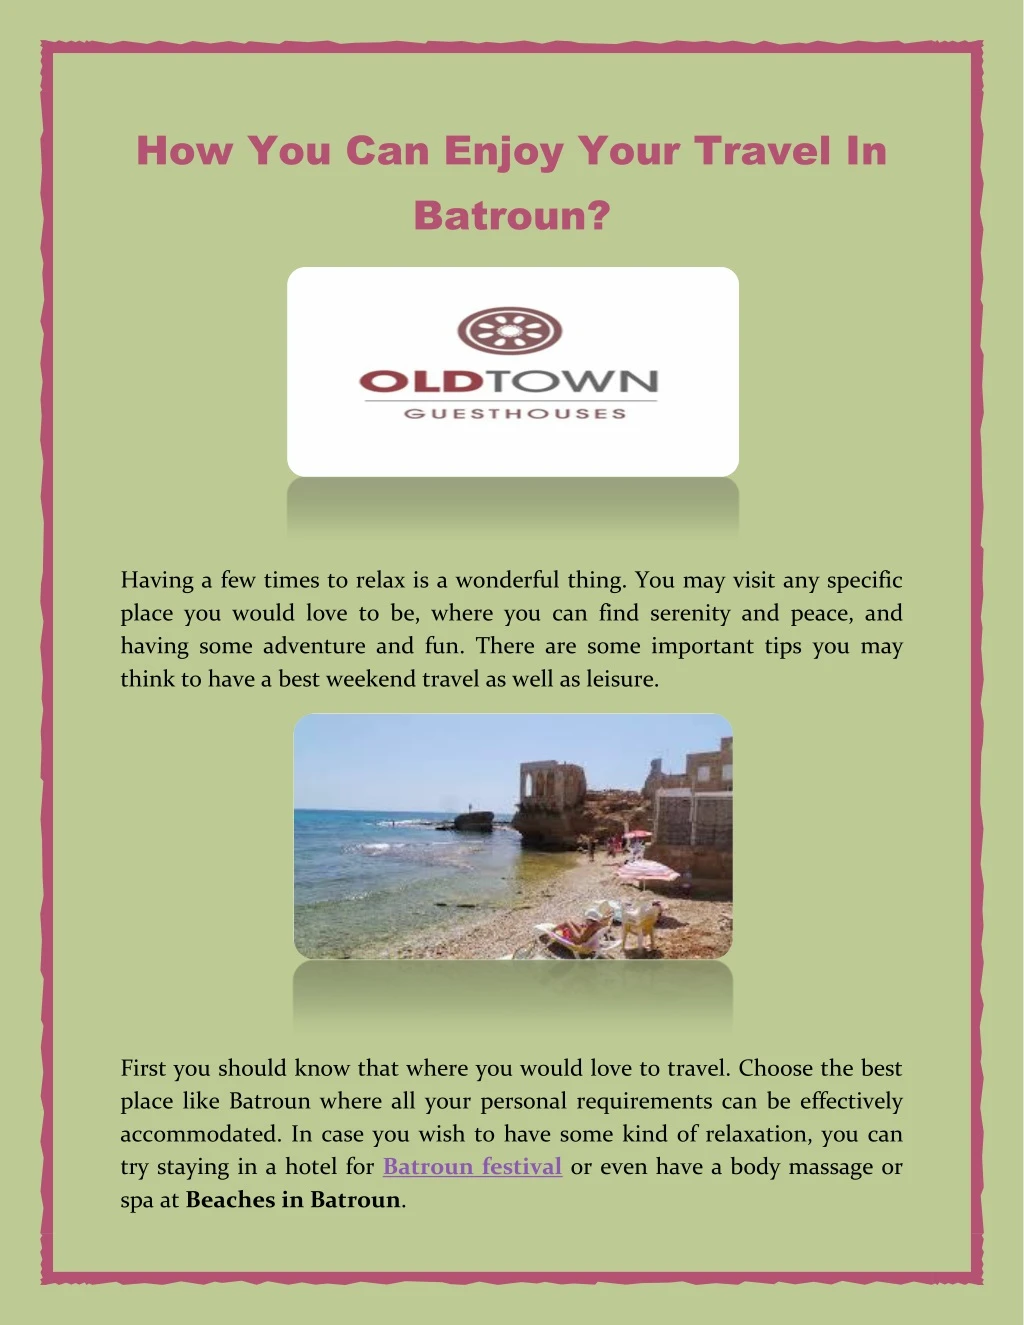 how you can enjoy your travel in batroun